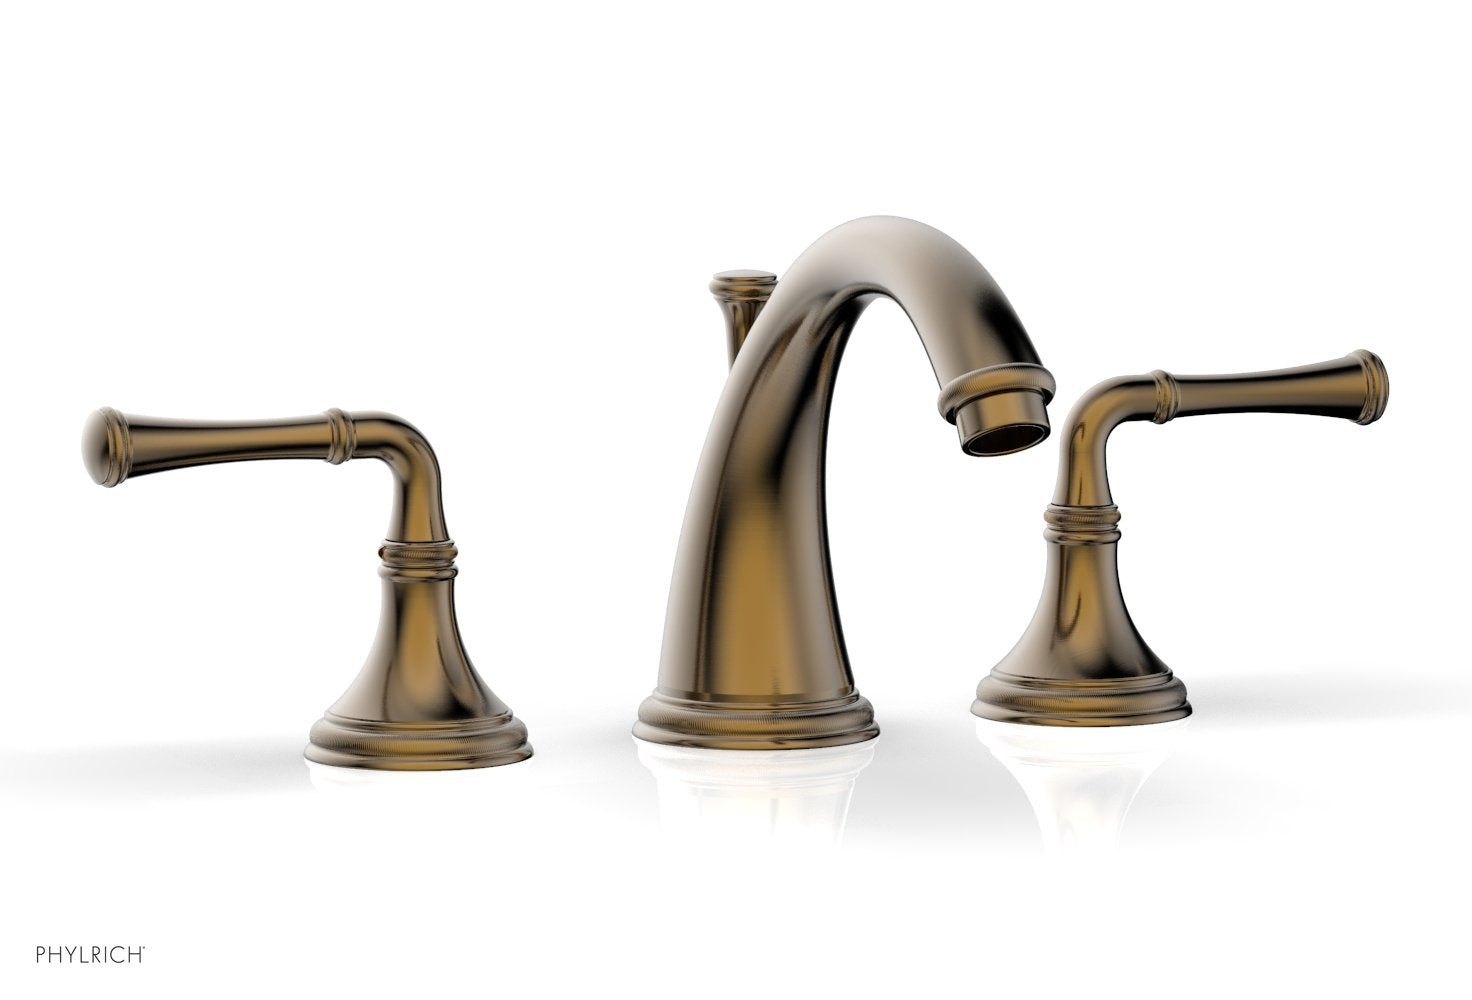 Phylrich COINED Widespread Faucet